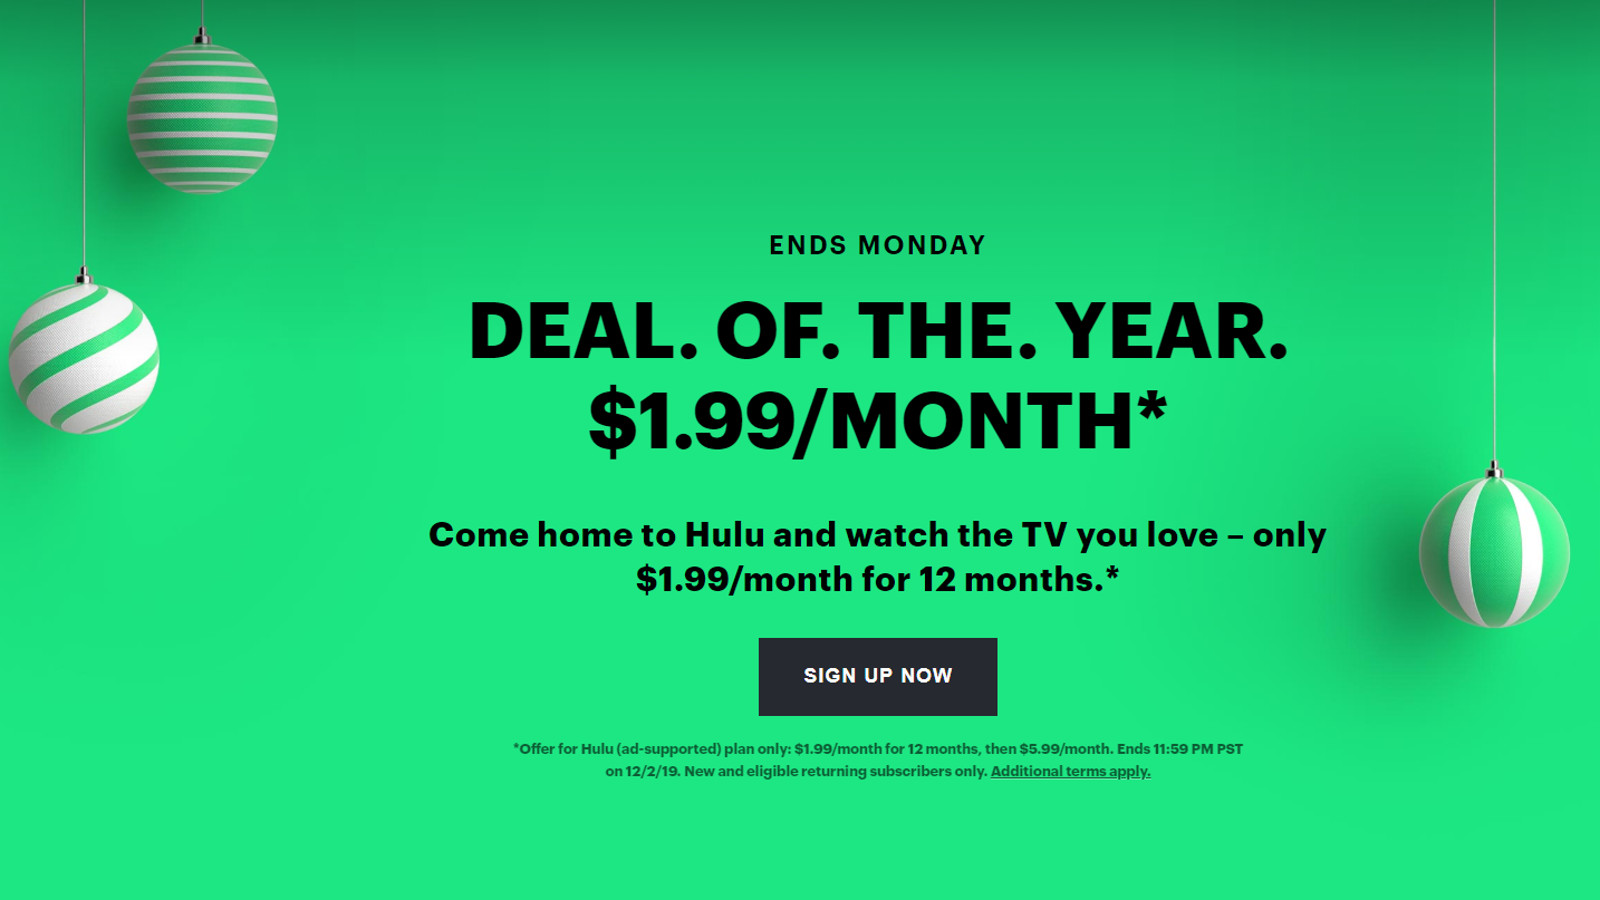 Get a year of Hulu for just $1.99 a month in this great deal - How To Get Black Friday Hulu Deal